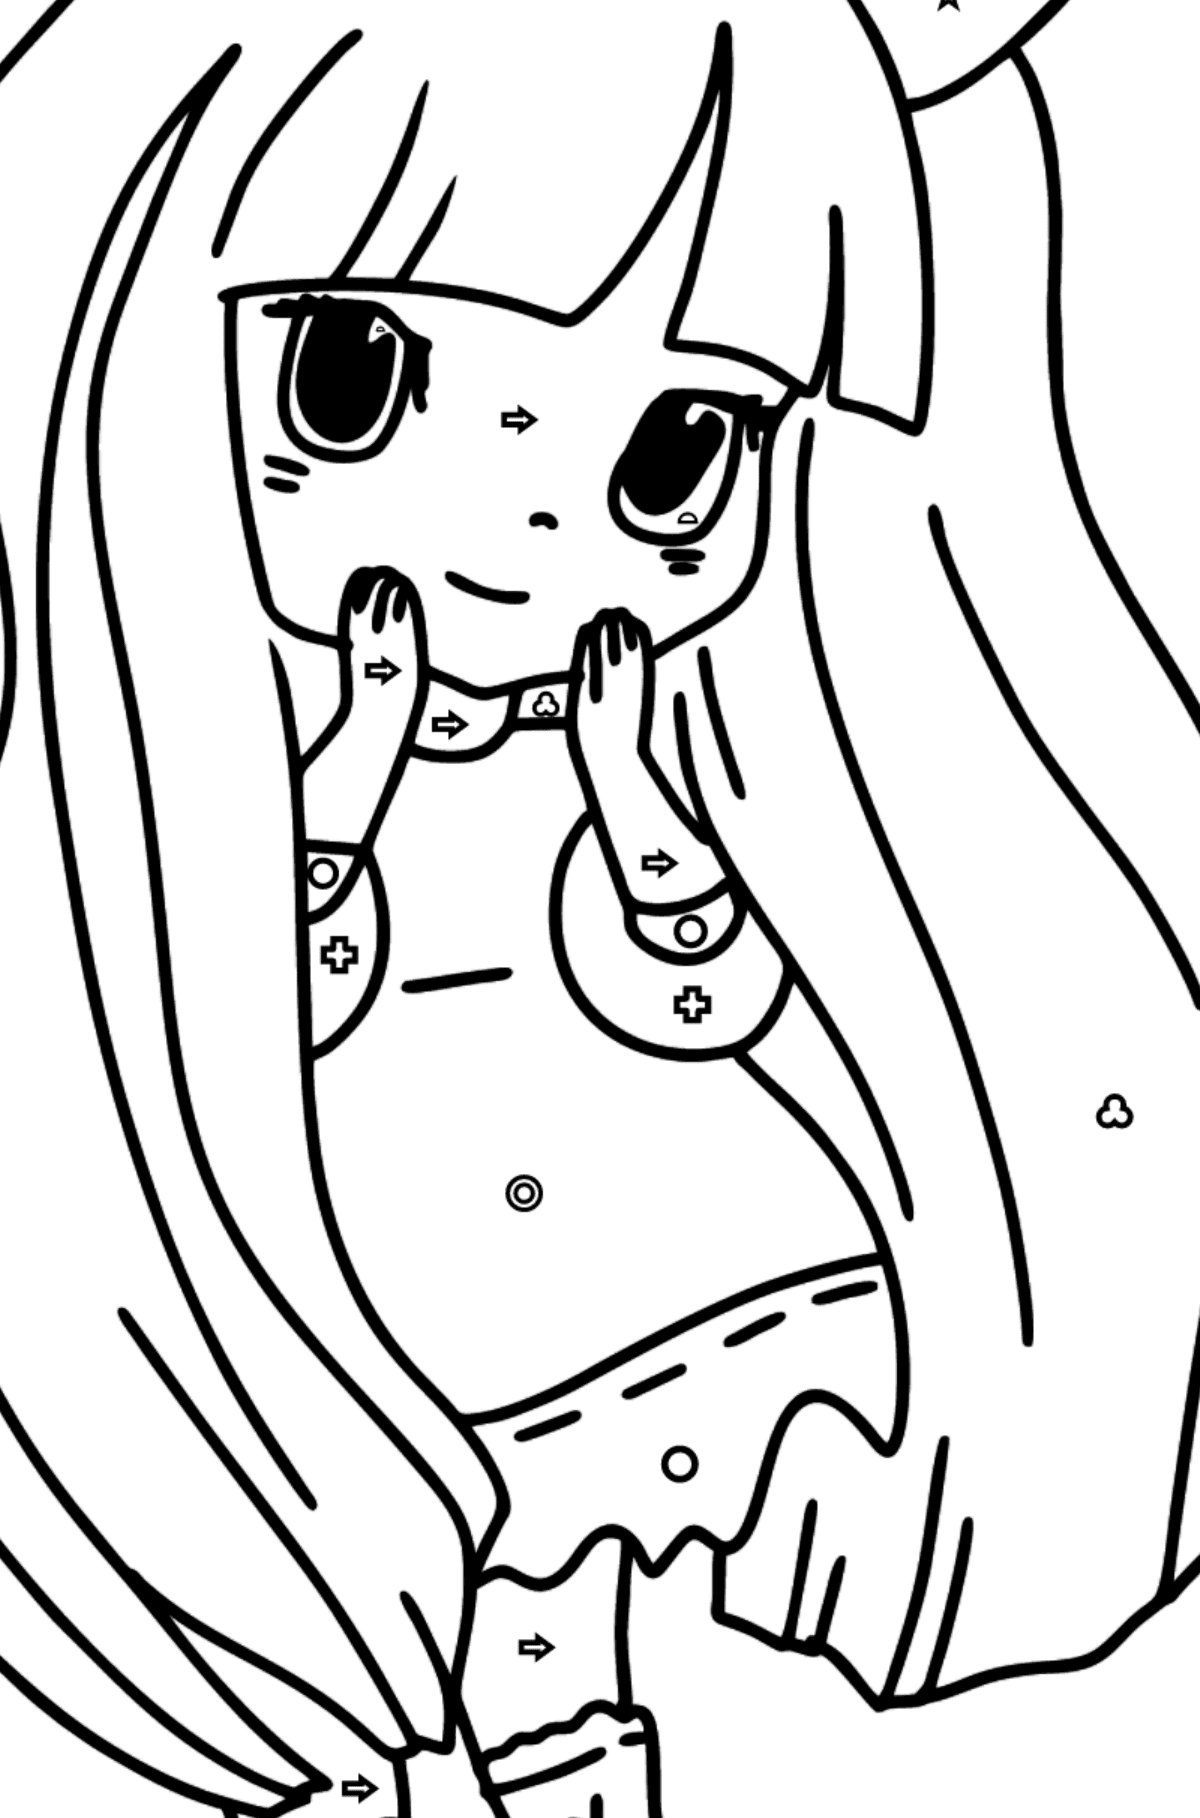 Anime Bunny Girl Coloring Pages - Coloring by Geometric Shapes for Kids